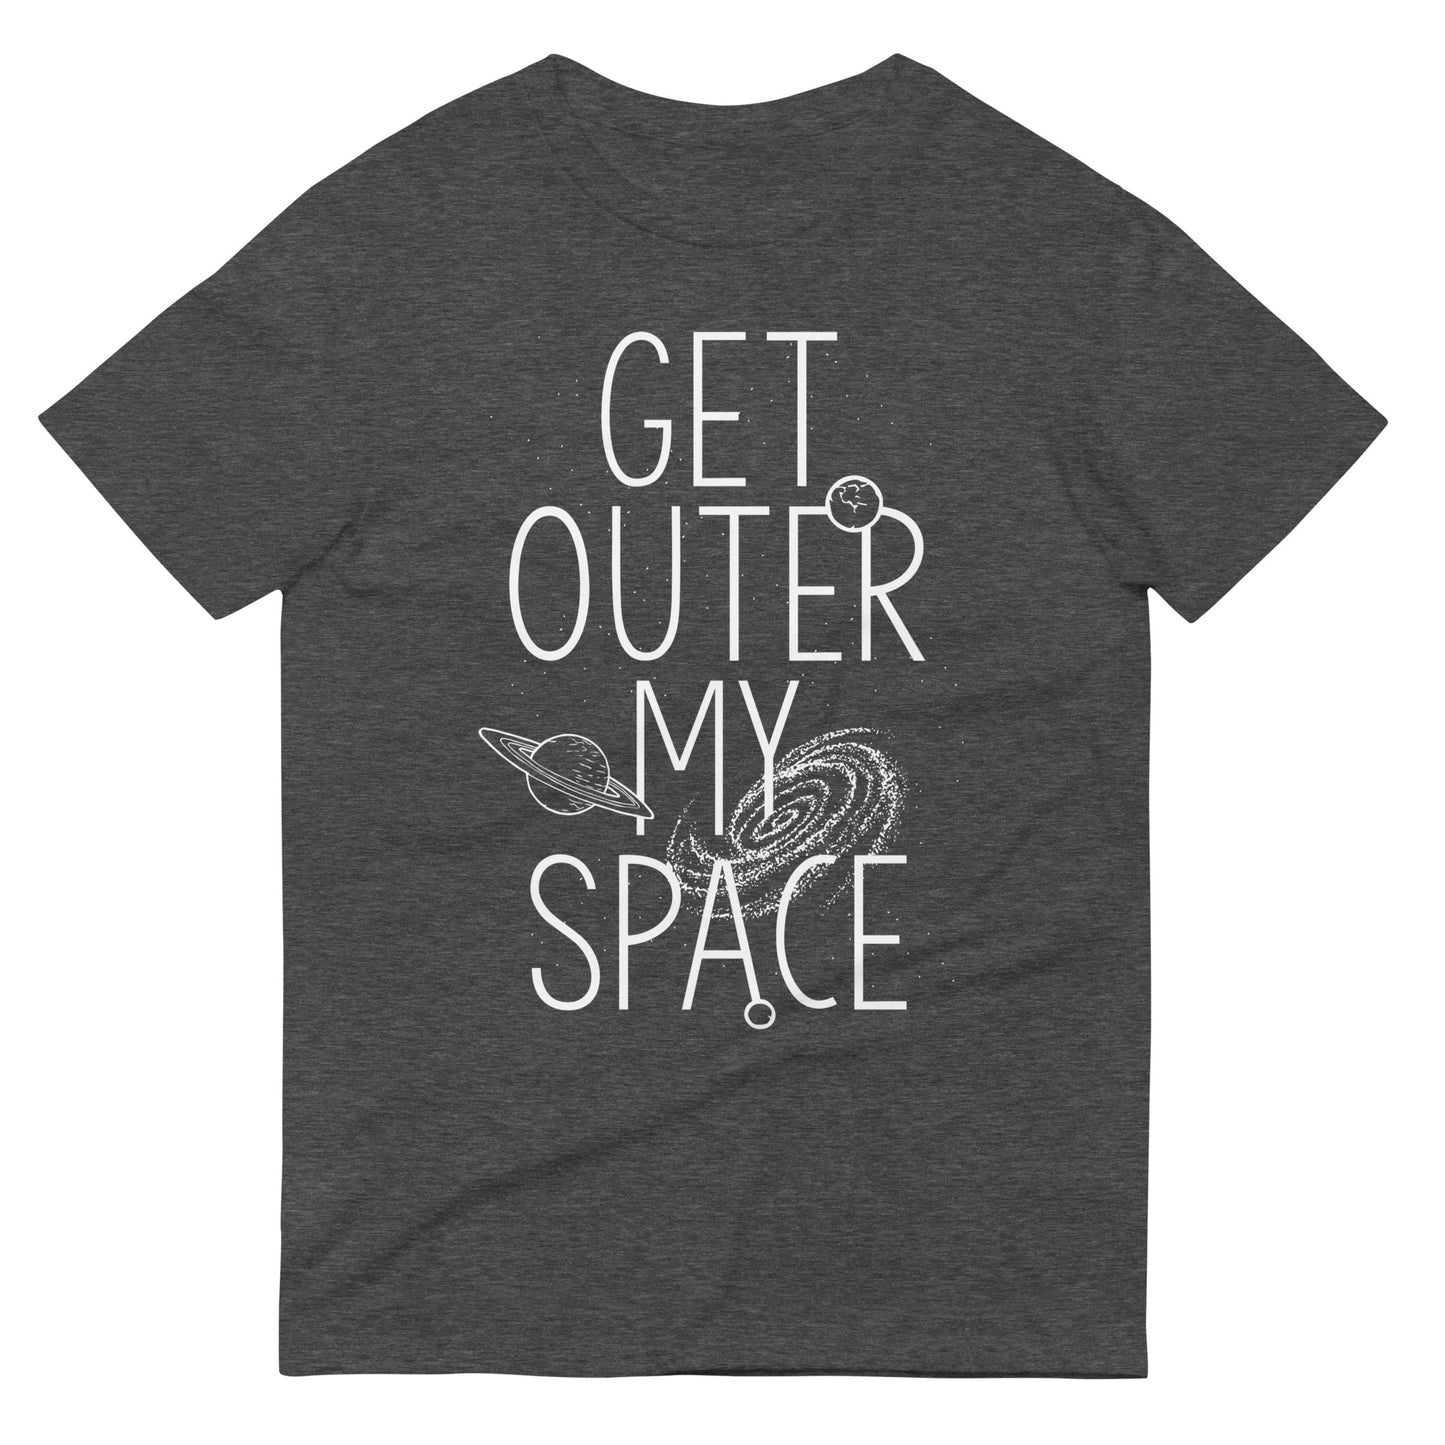 Get Outer My Space Men's Signature Tee